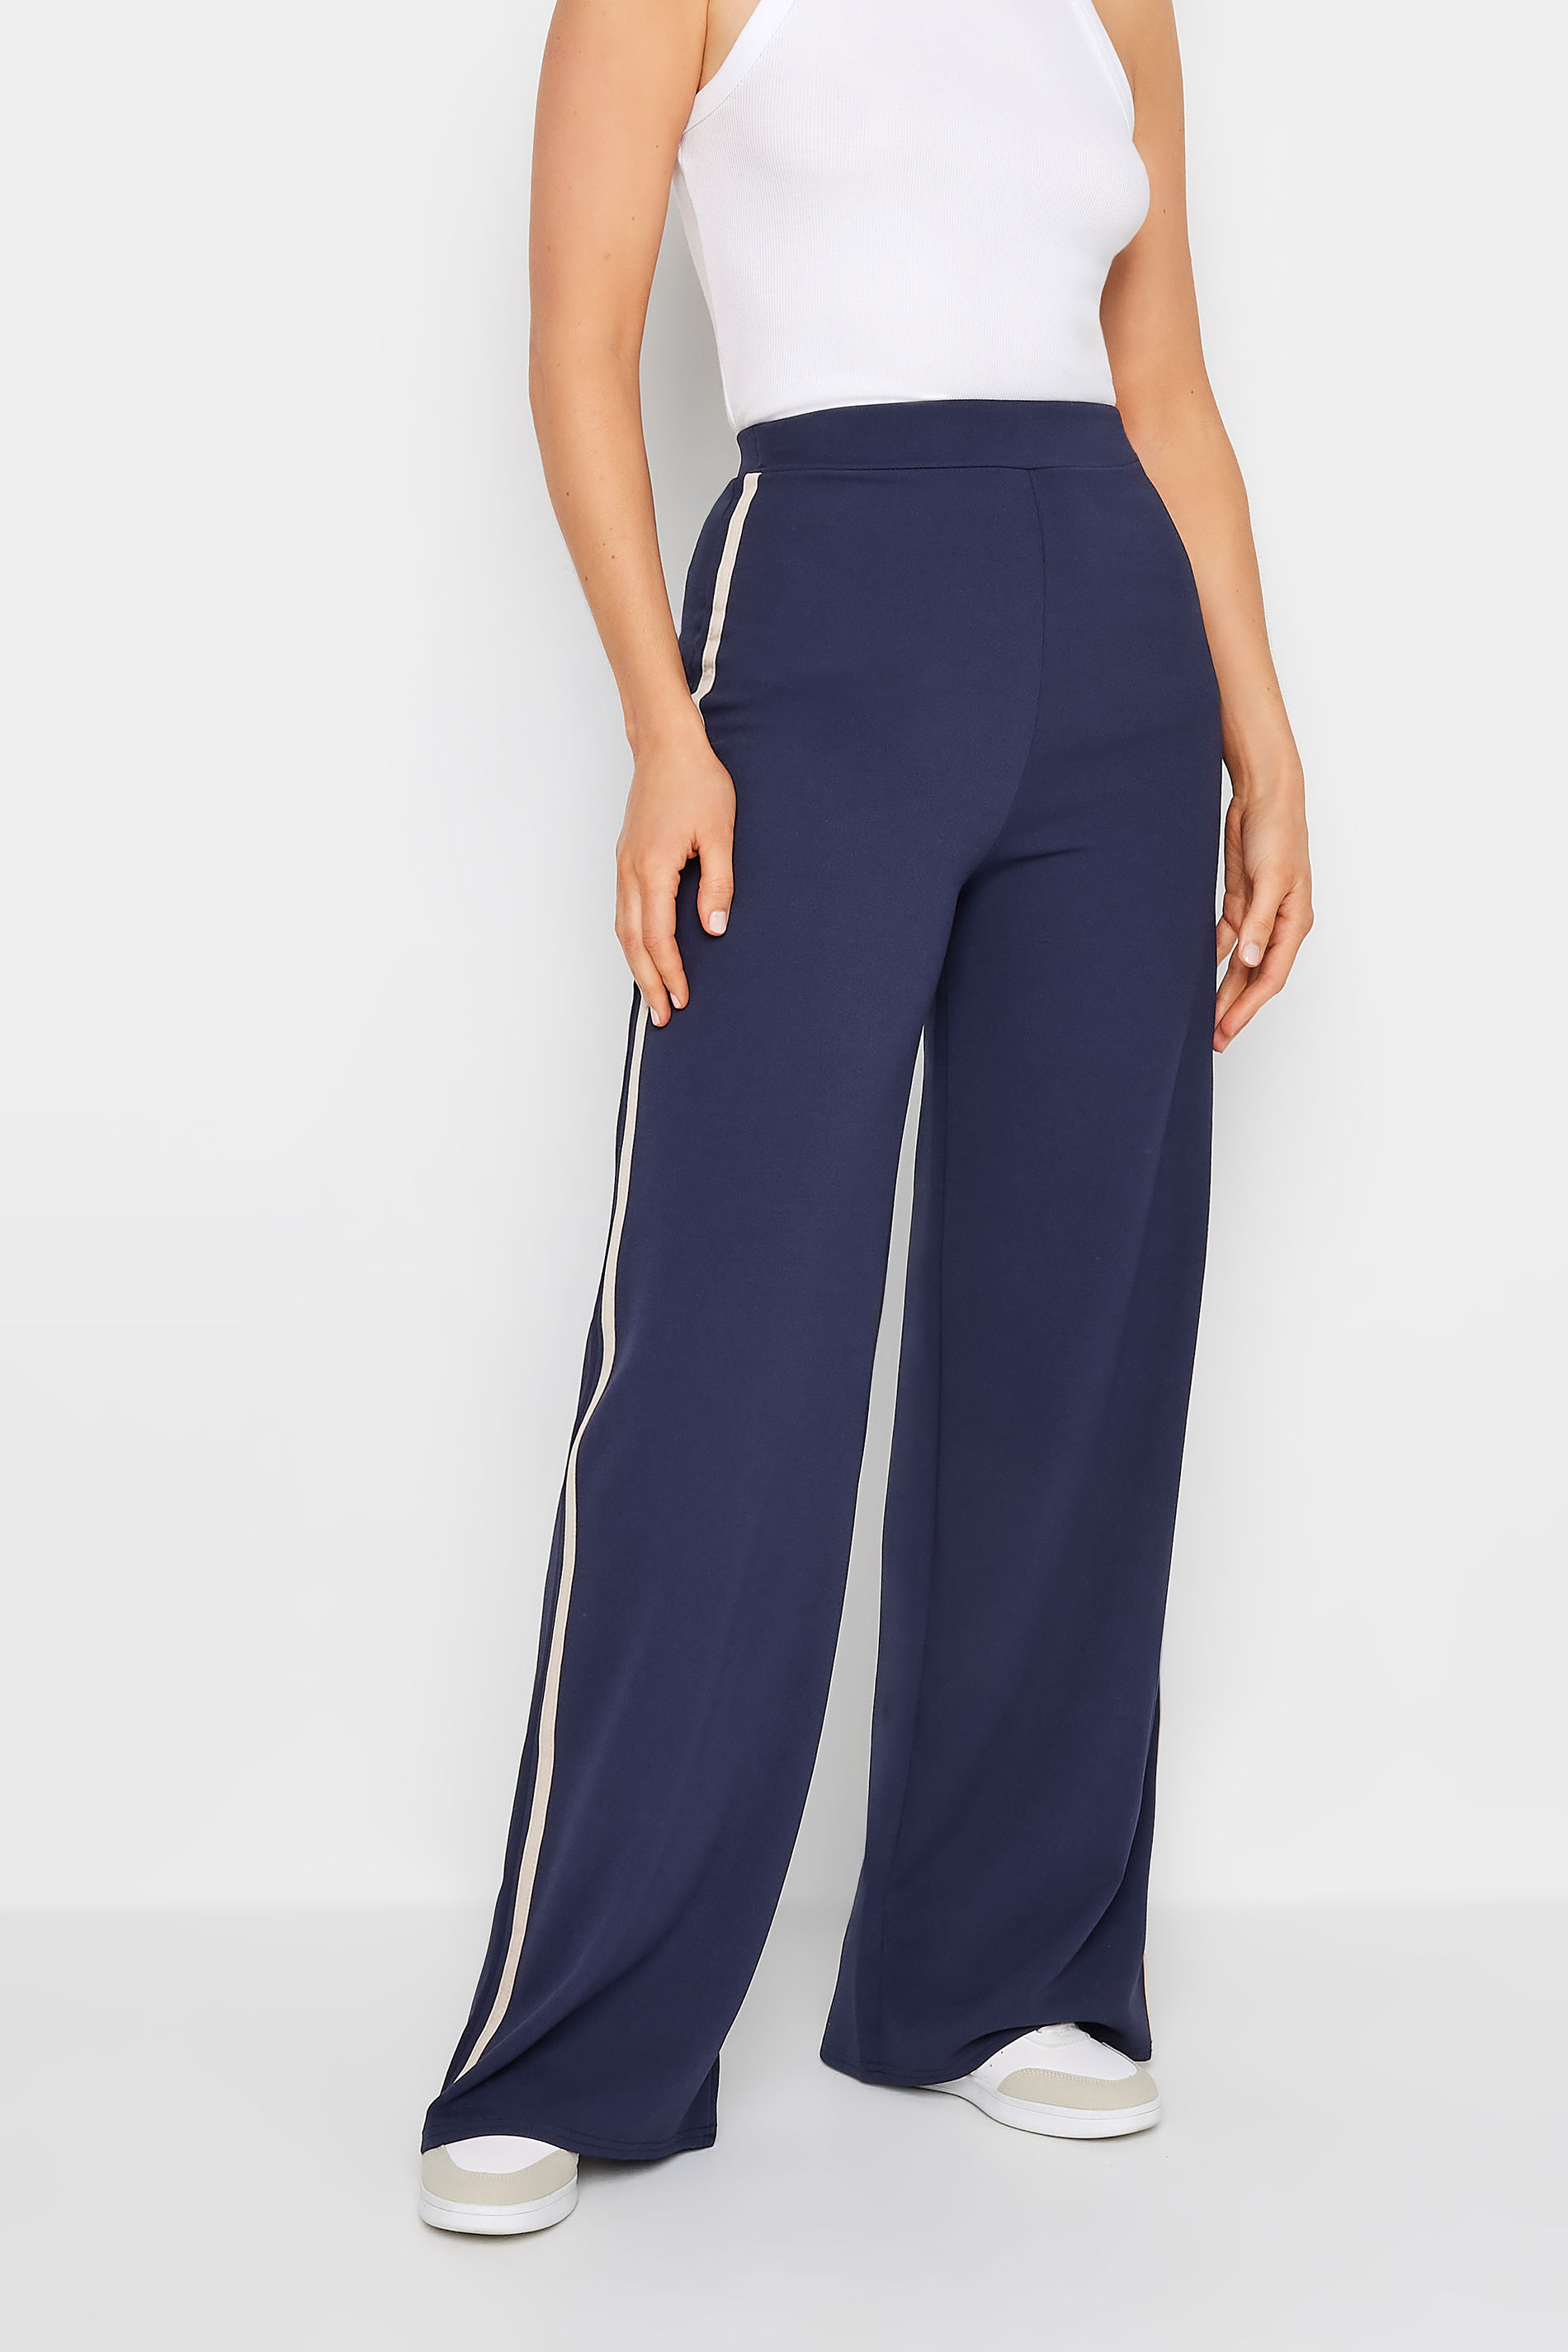 LTS Tall Womens Navy Blue & Stone Brown Side Stripe Wide Leg Trousers | Long Tall Sally 2